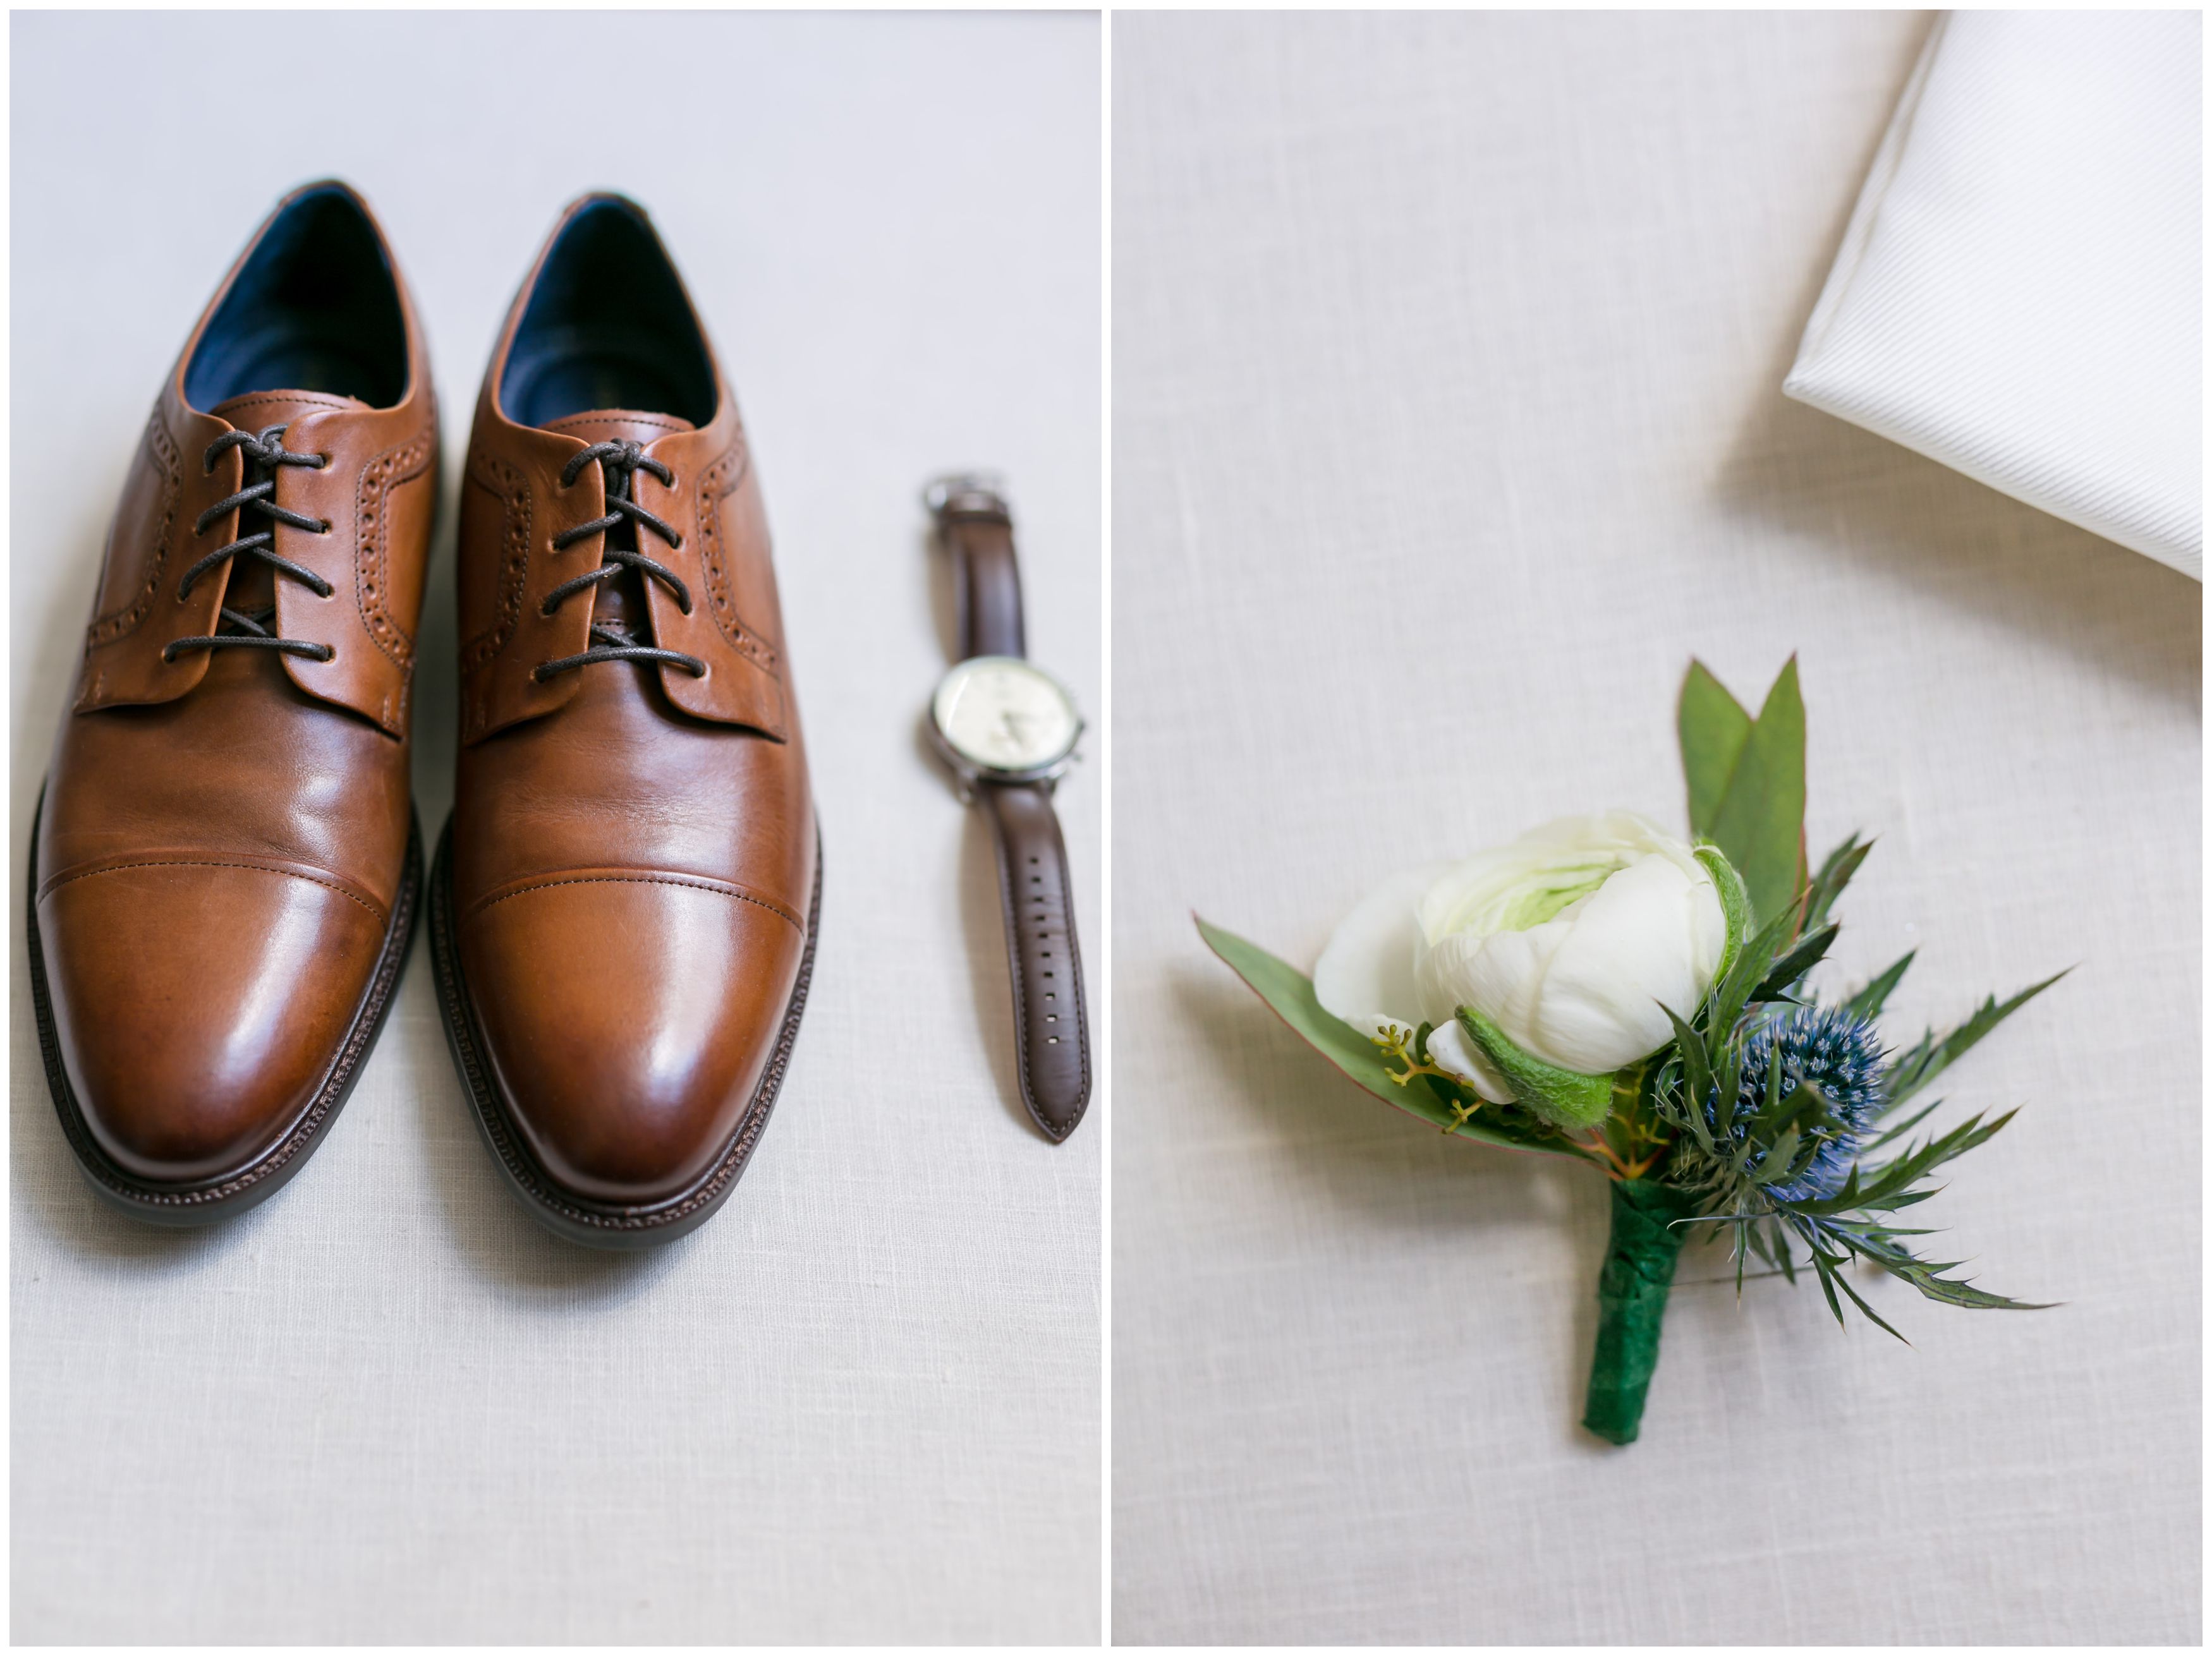 Groom details shoes, watch, white boutonniere